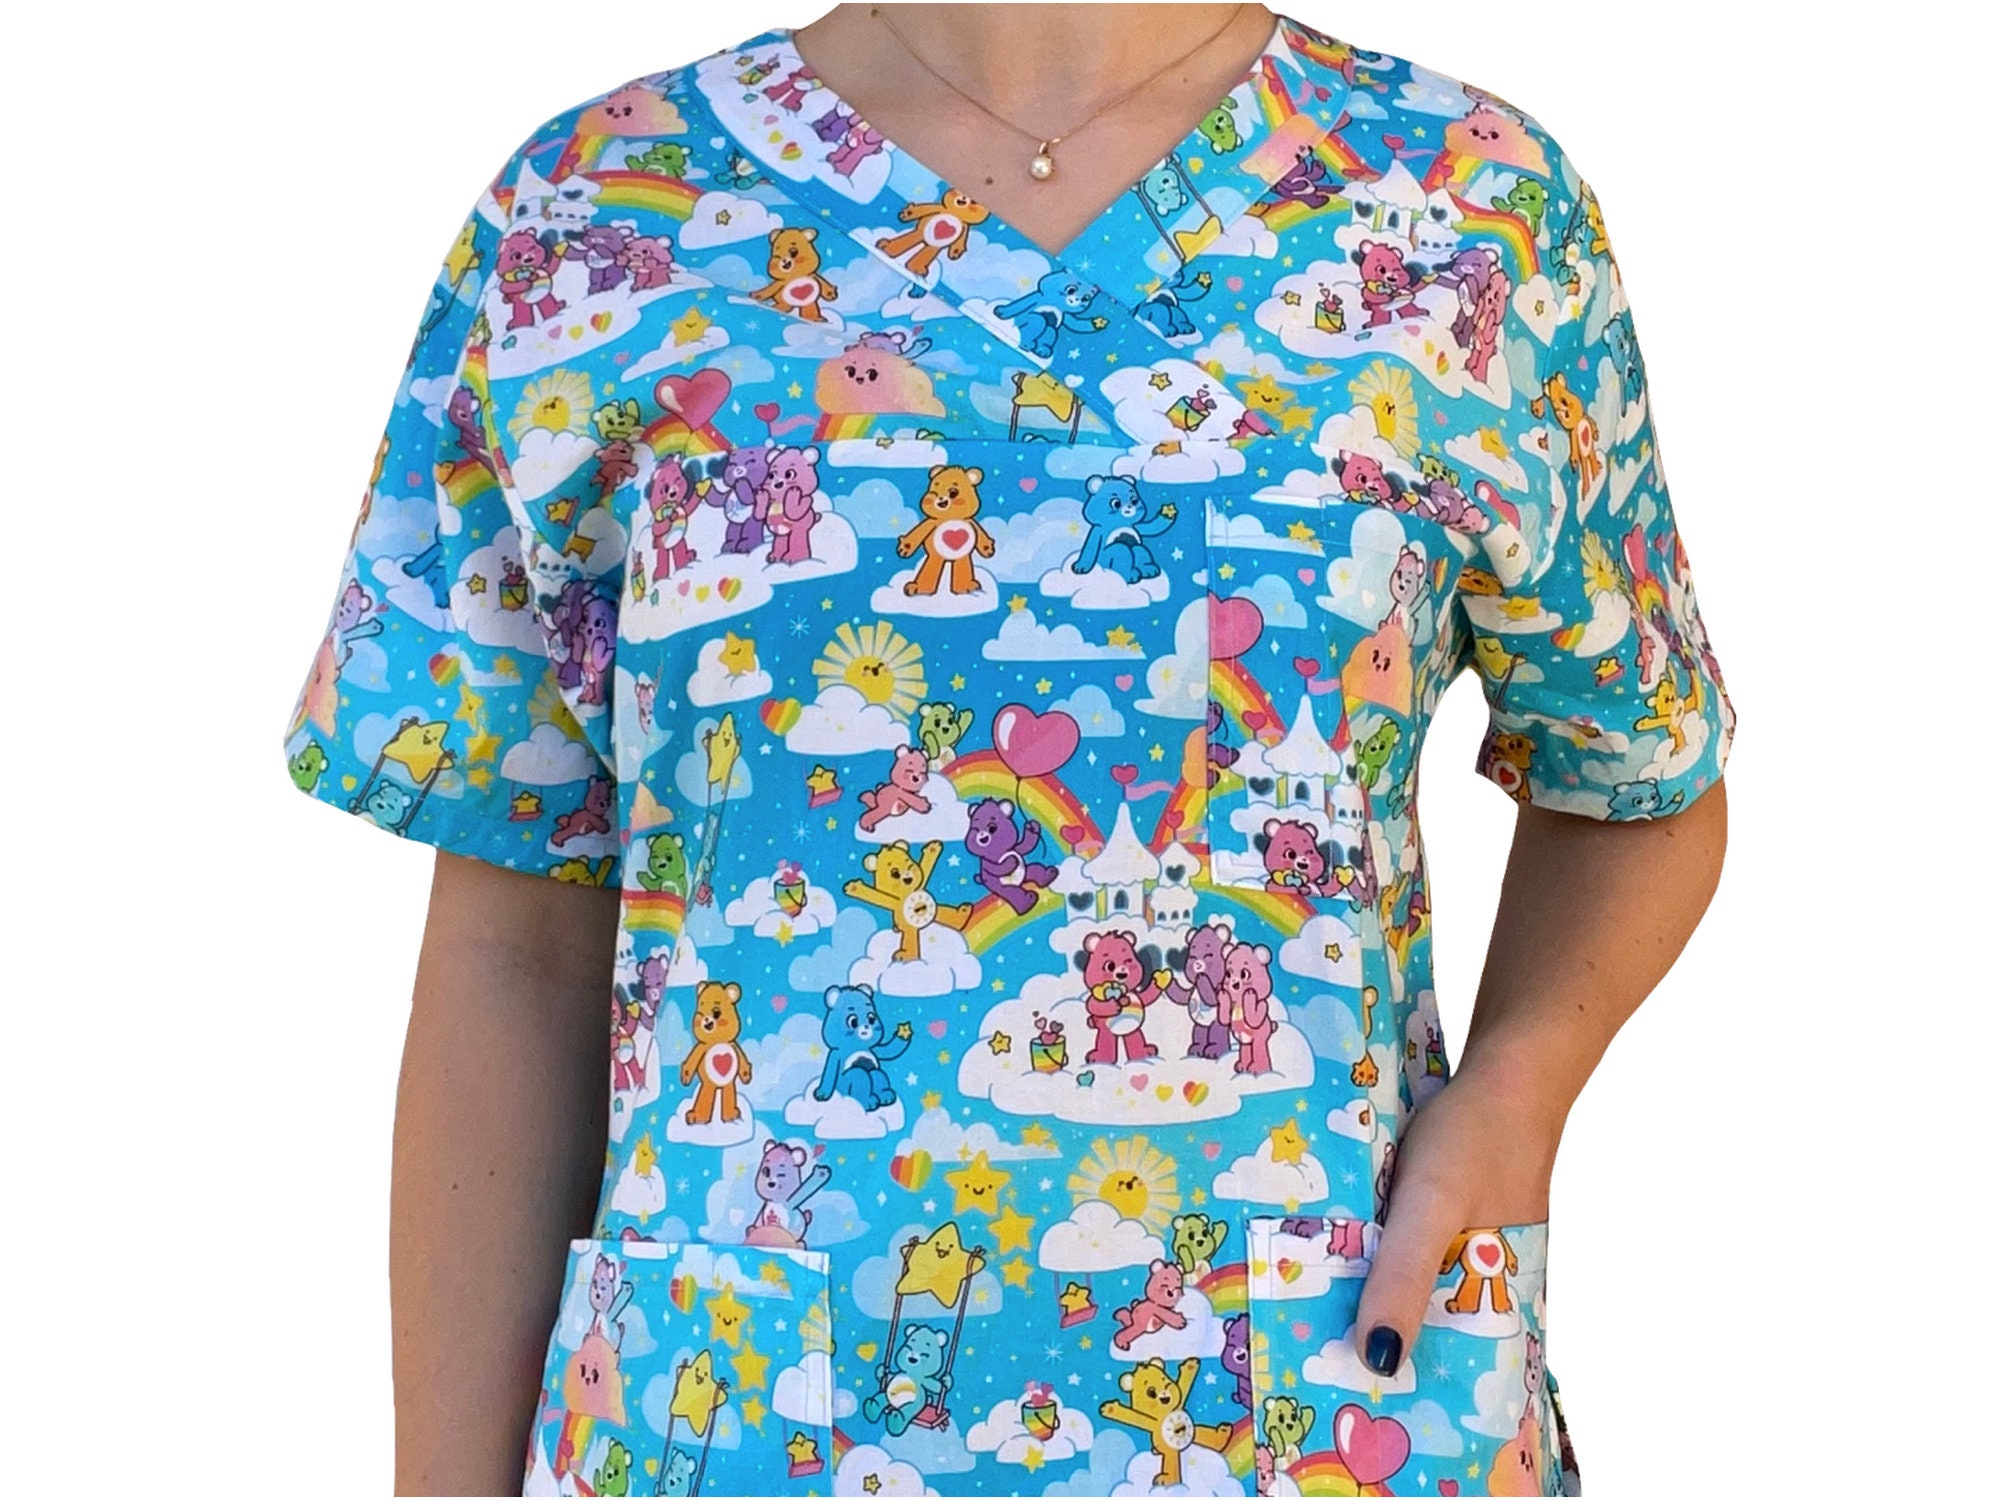 CARE BEAR Scrub Tops. 100% Cotton. for All Healthcare and Medical  Professionals nurses, Doctors, Dentists & Vets. 